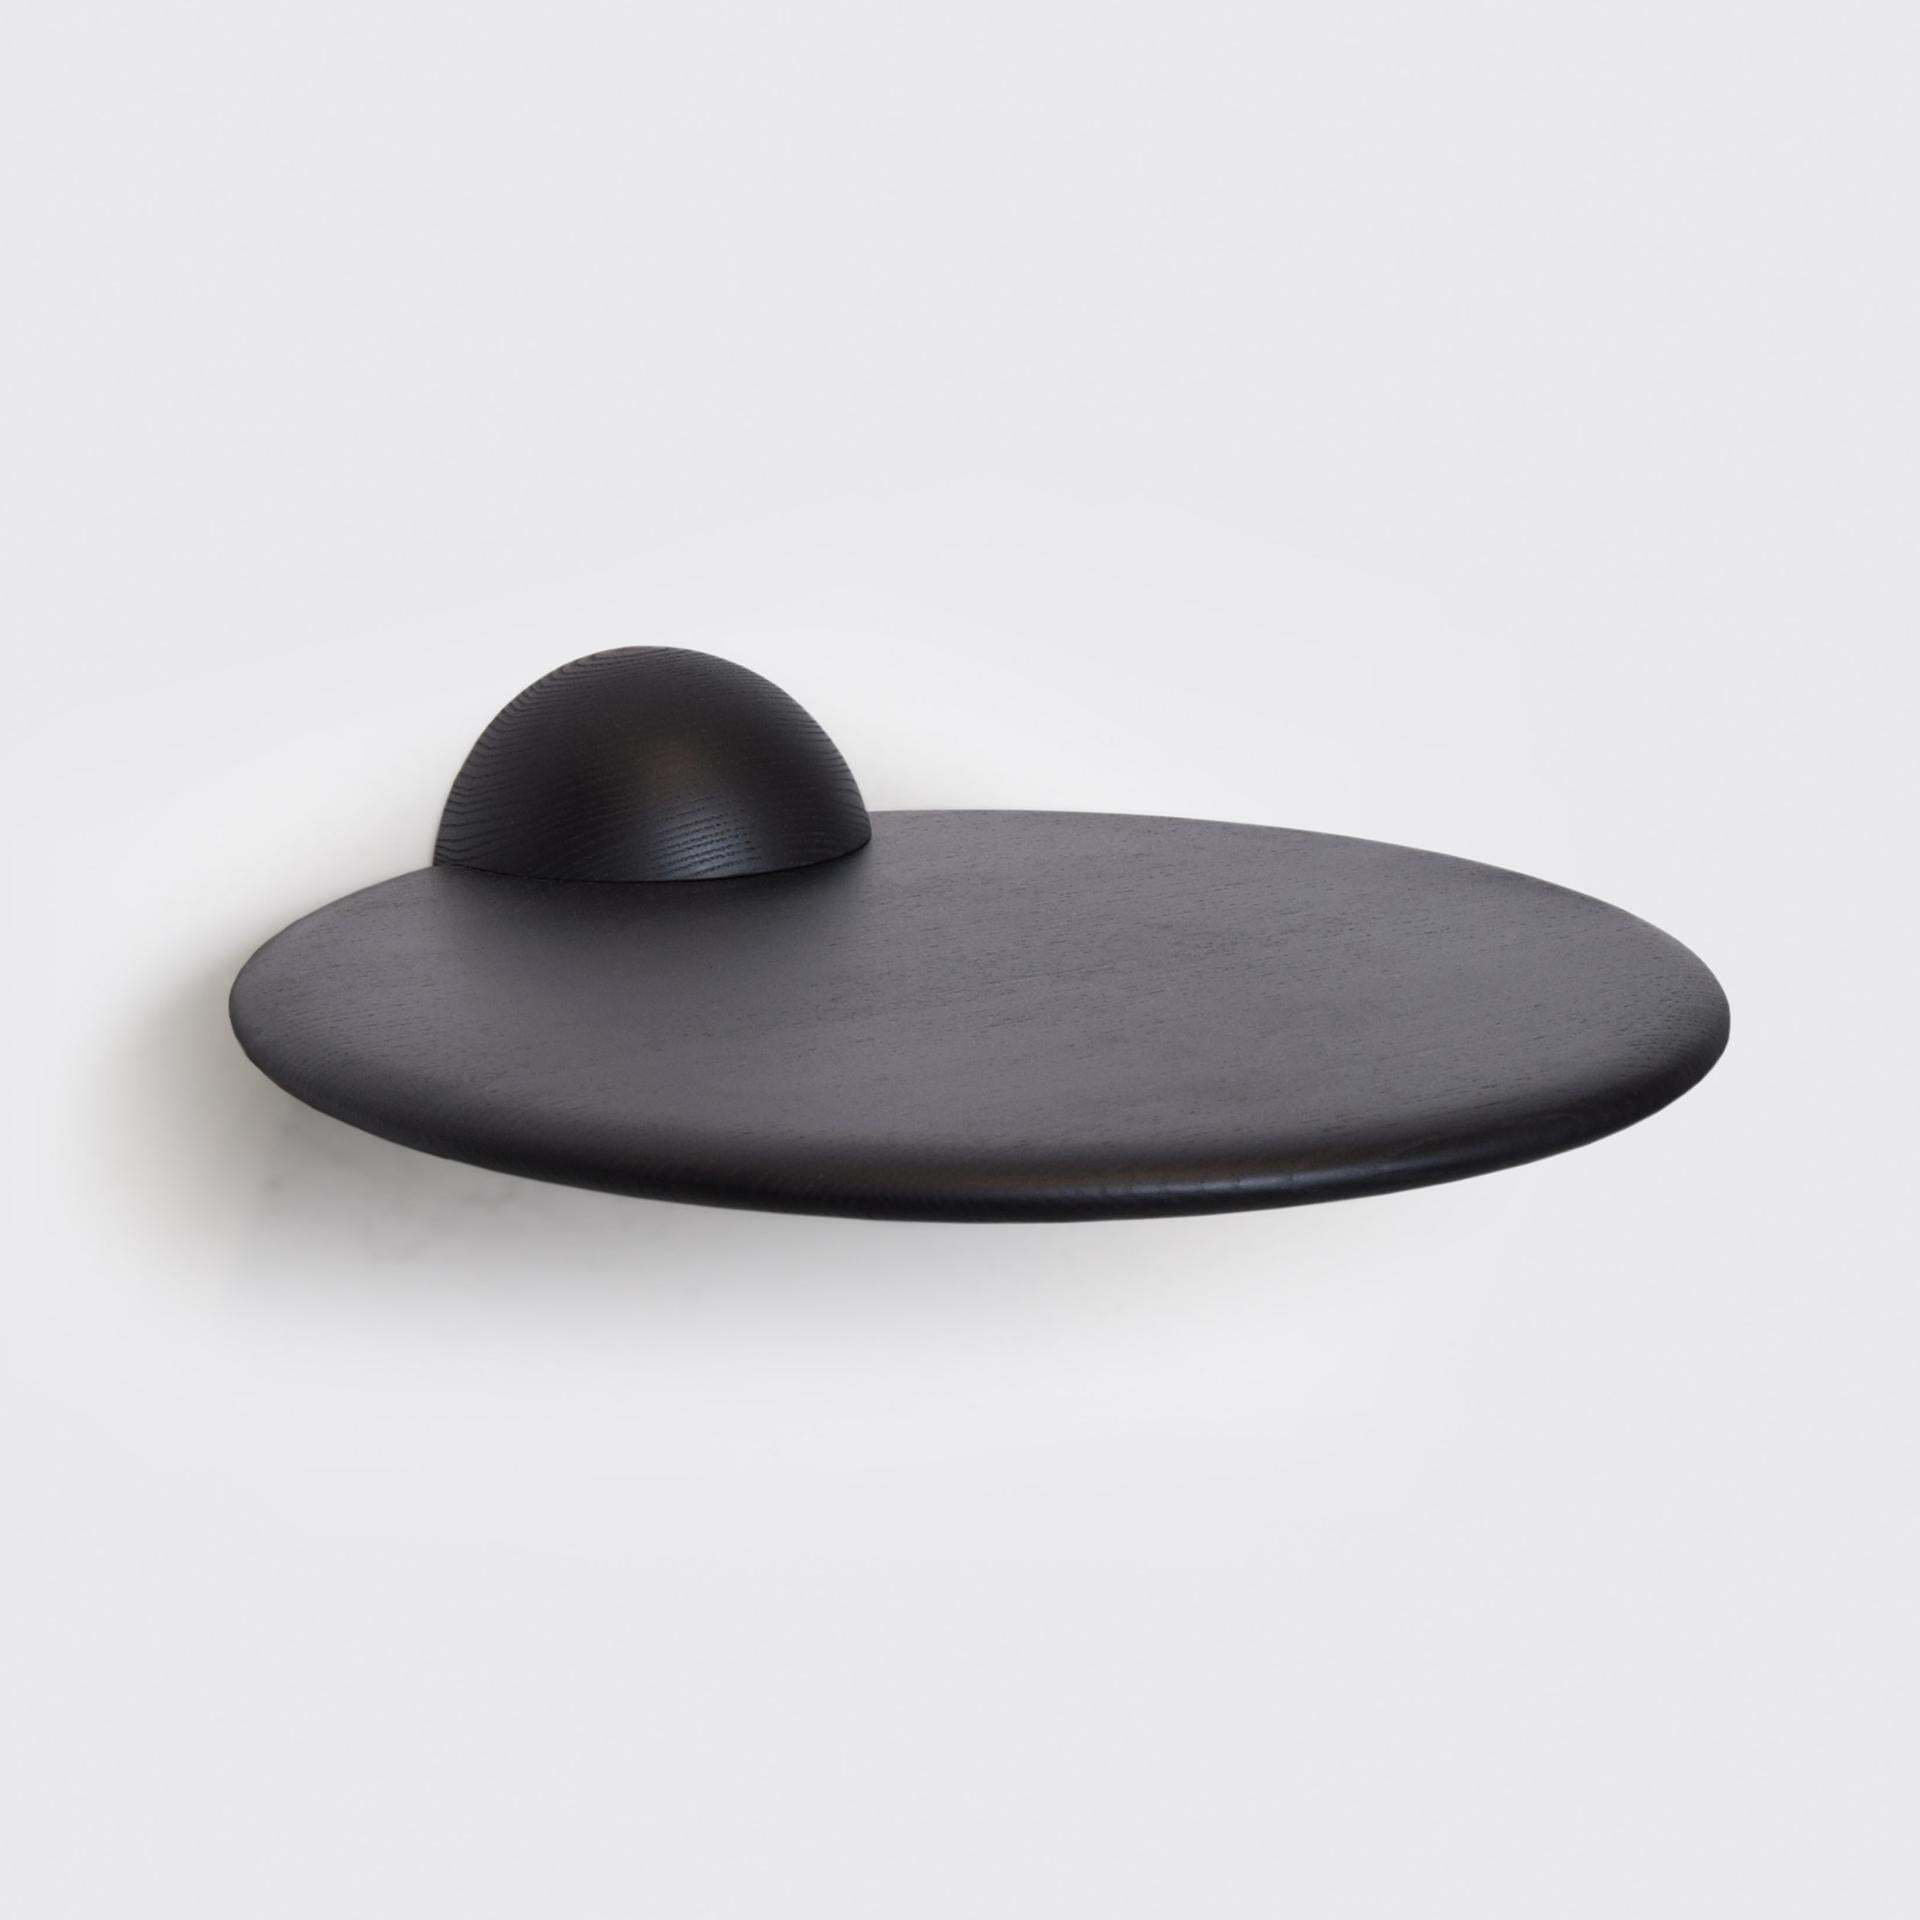 The half sphere holding the plane contributes to a bold yet minimal look that works well in several different spaces and environments. Whether used as a shelf for an extraordinary object, as a bedside table or as a small bar table it's present with